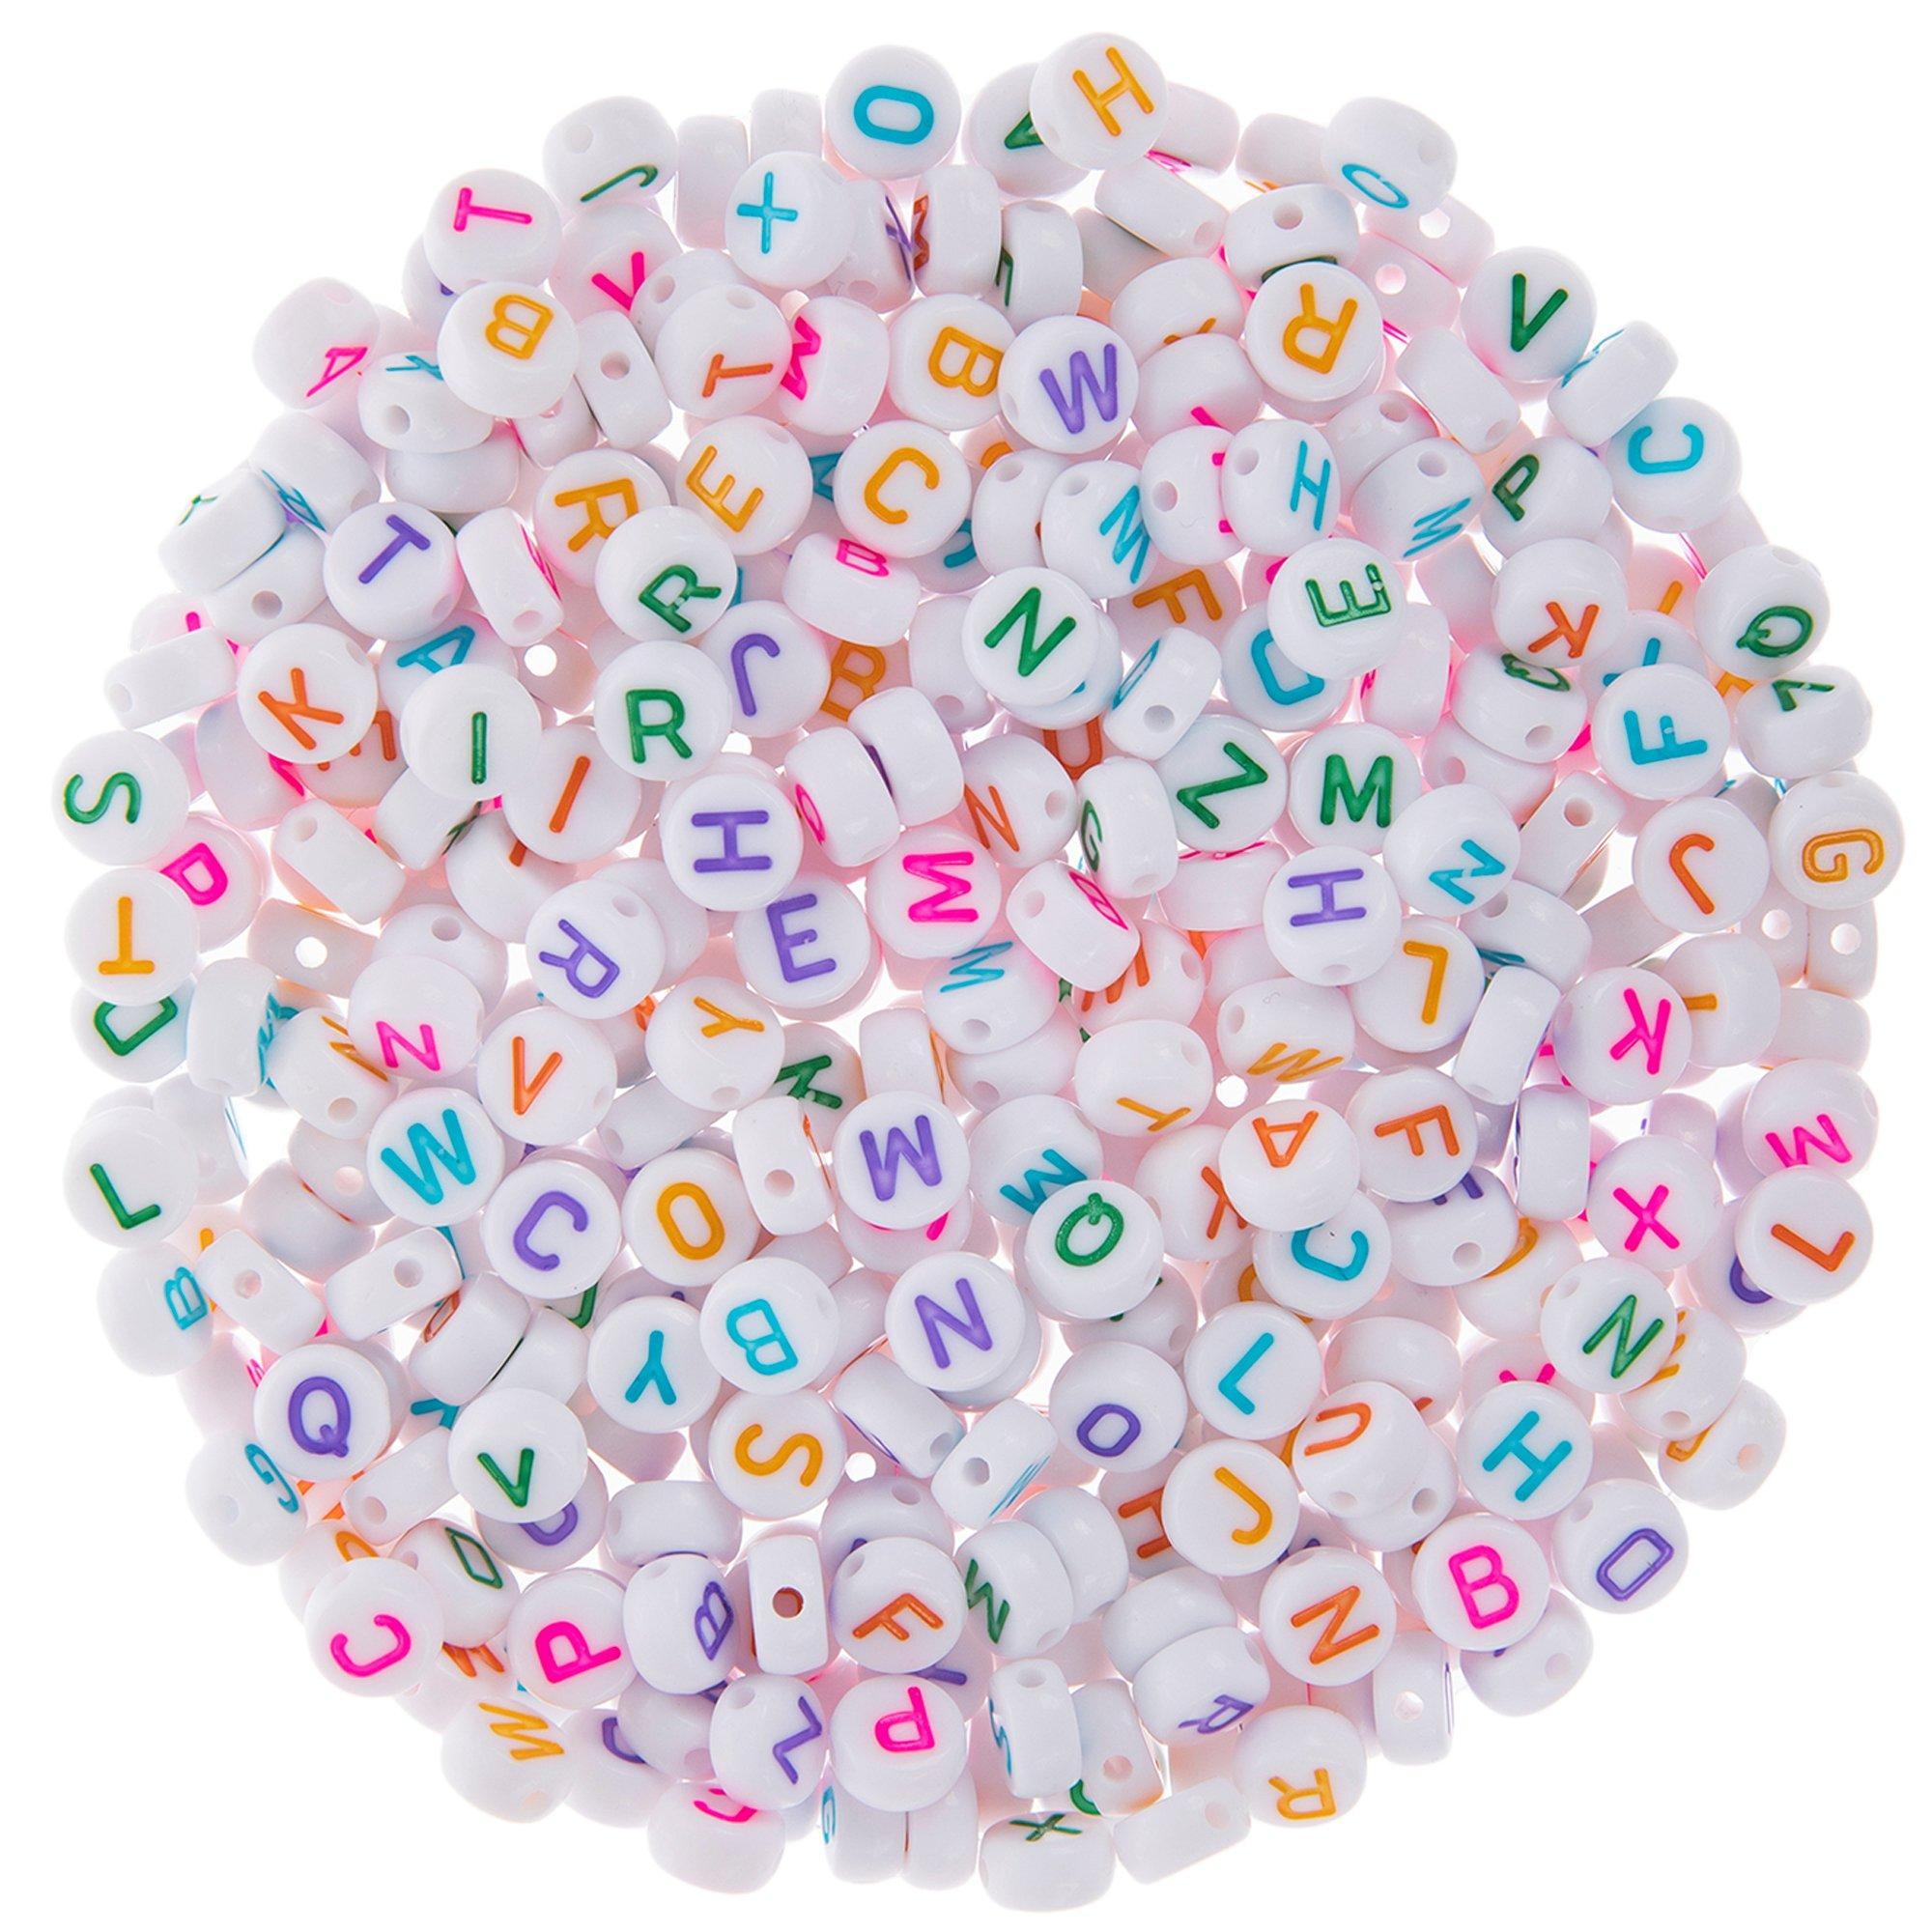 HERZWILD 1000 Pcs Round Letter Beads, Colored Pearlescence Letter Beads,Macaron Color Beads, Craft Beads Letters (A-Z),Colorful Flat Beads and